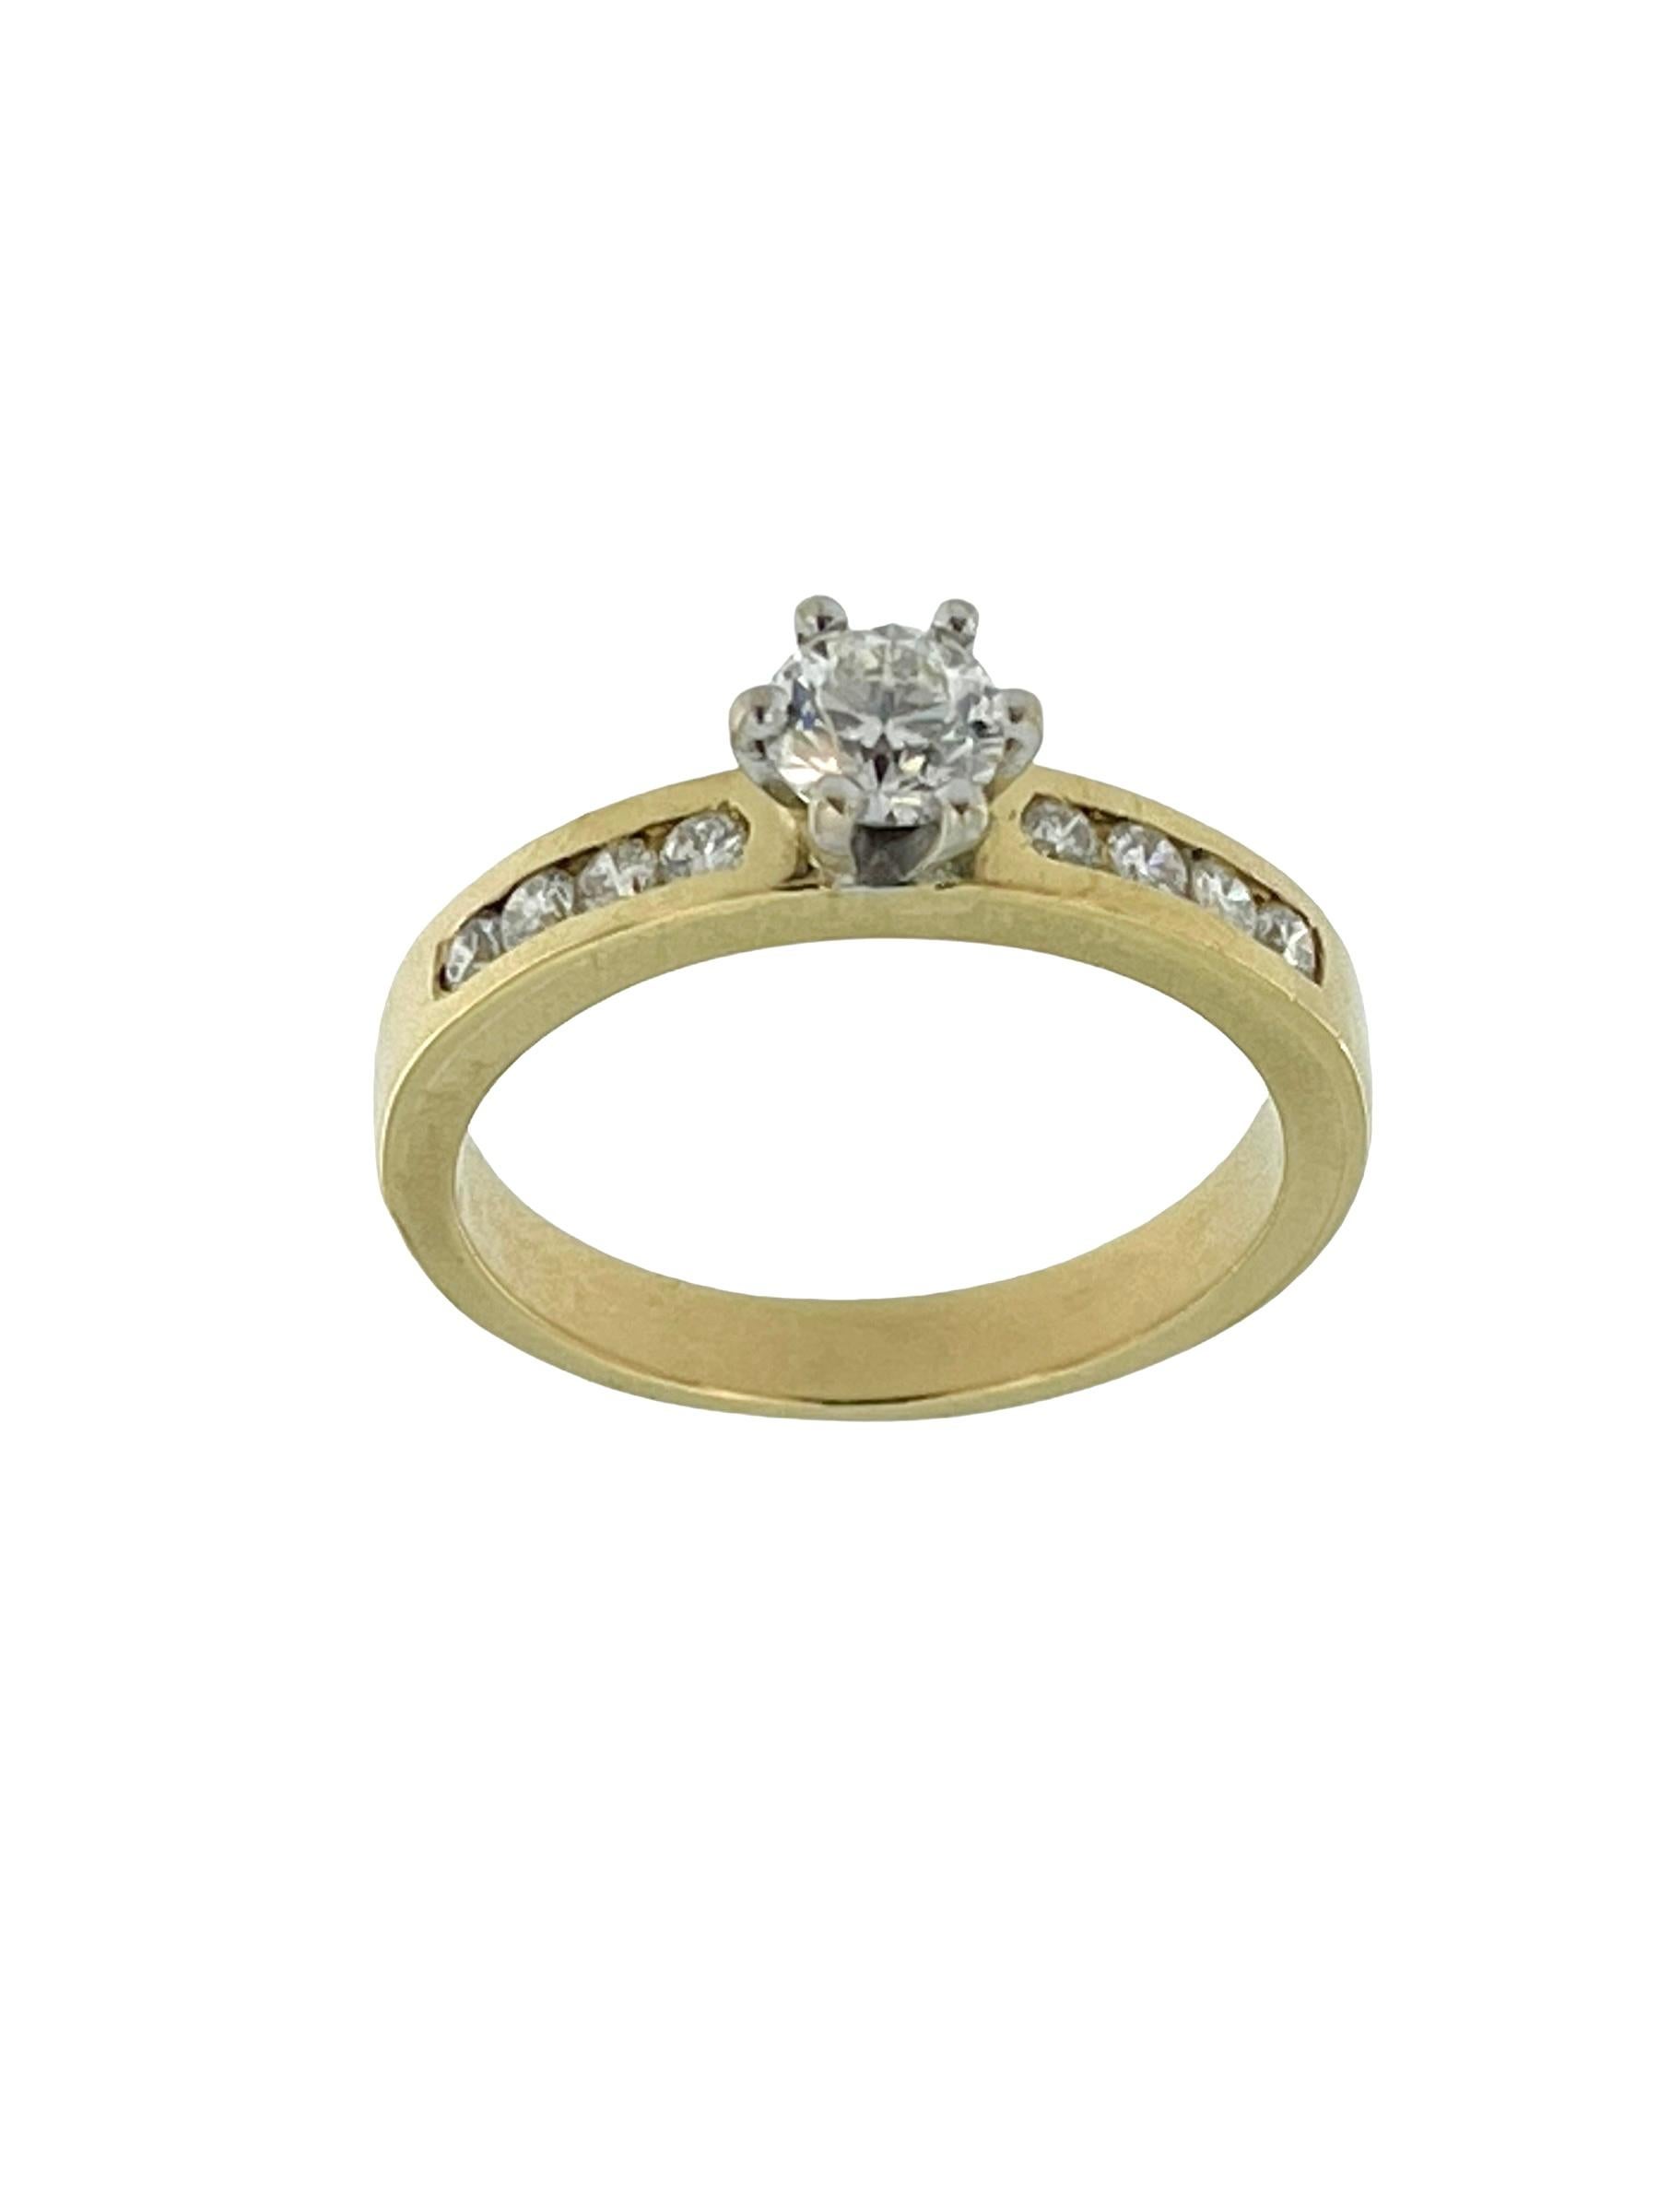 Modern HRD Certified Yellow and White Gold Engagement Ring with Diamonds For Sale